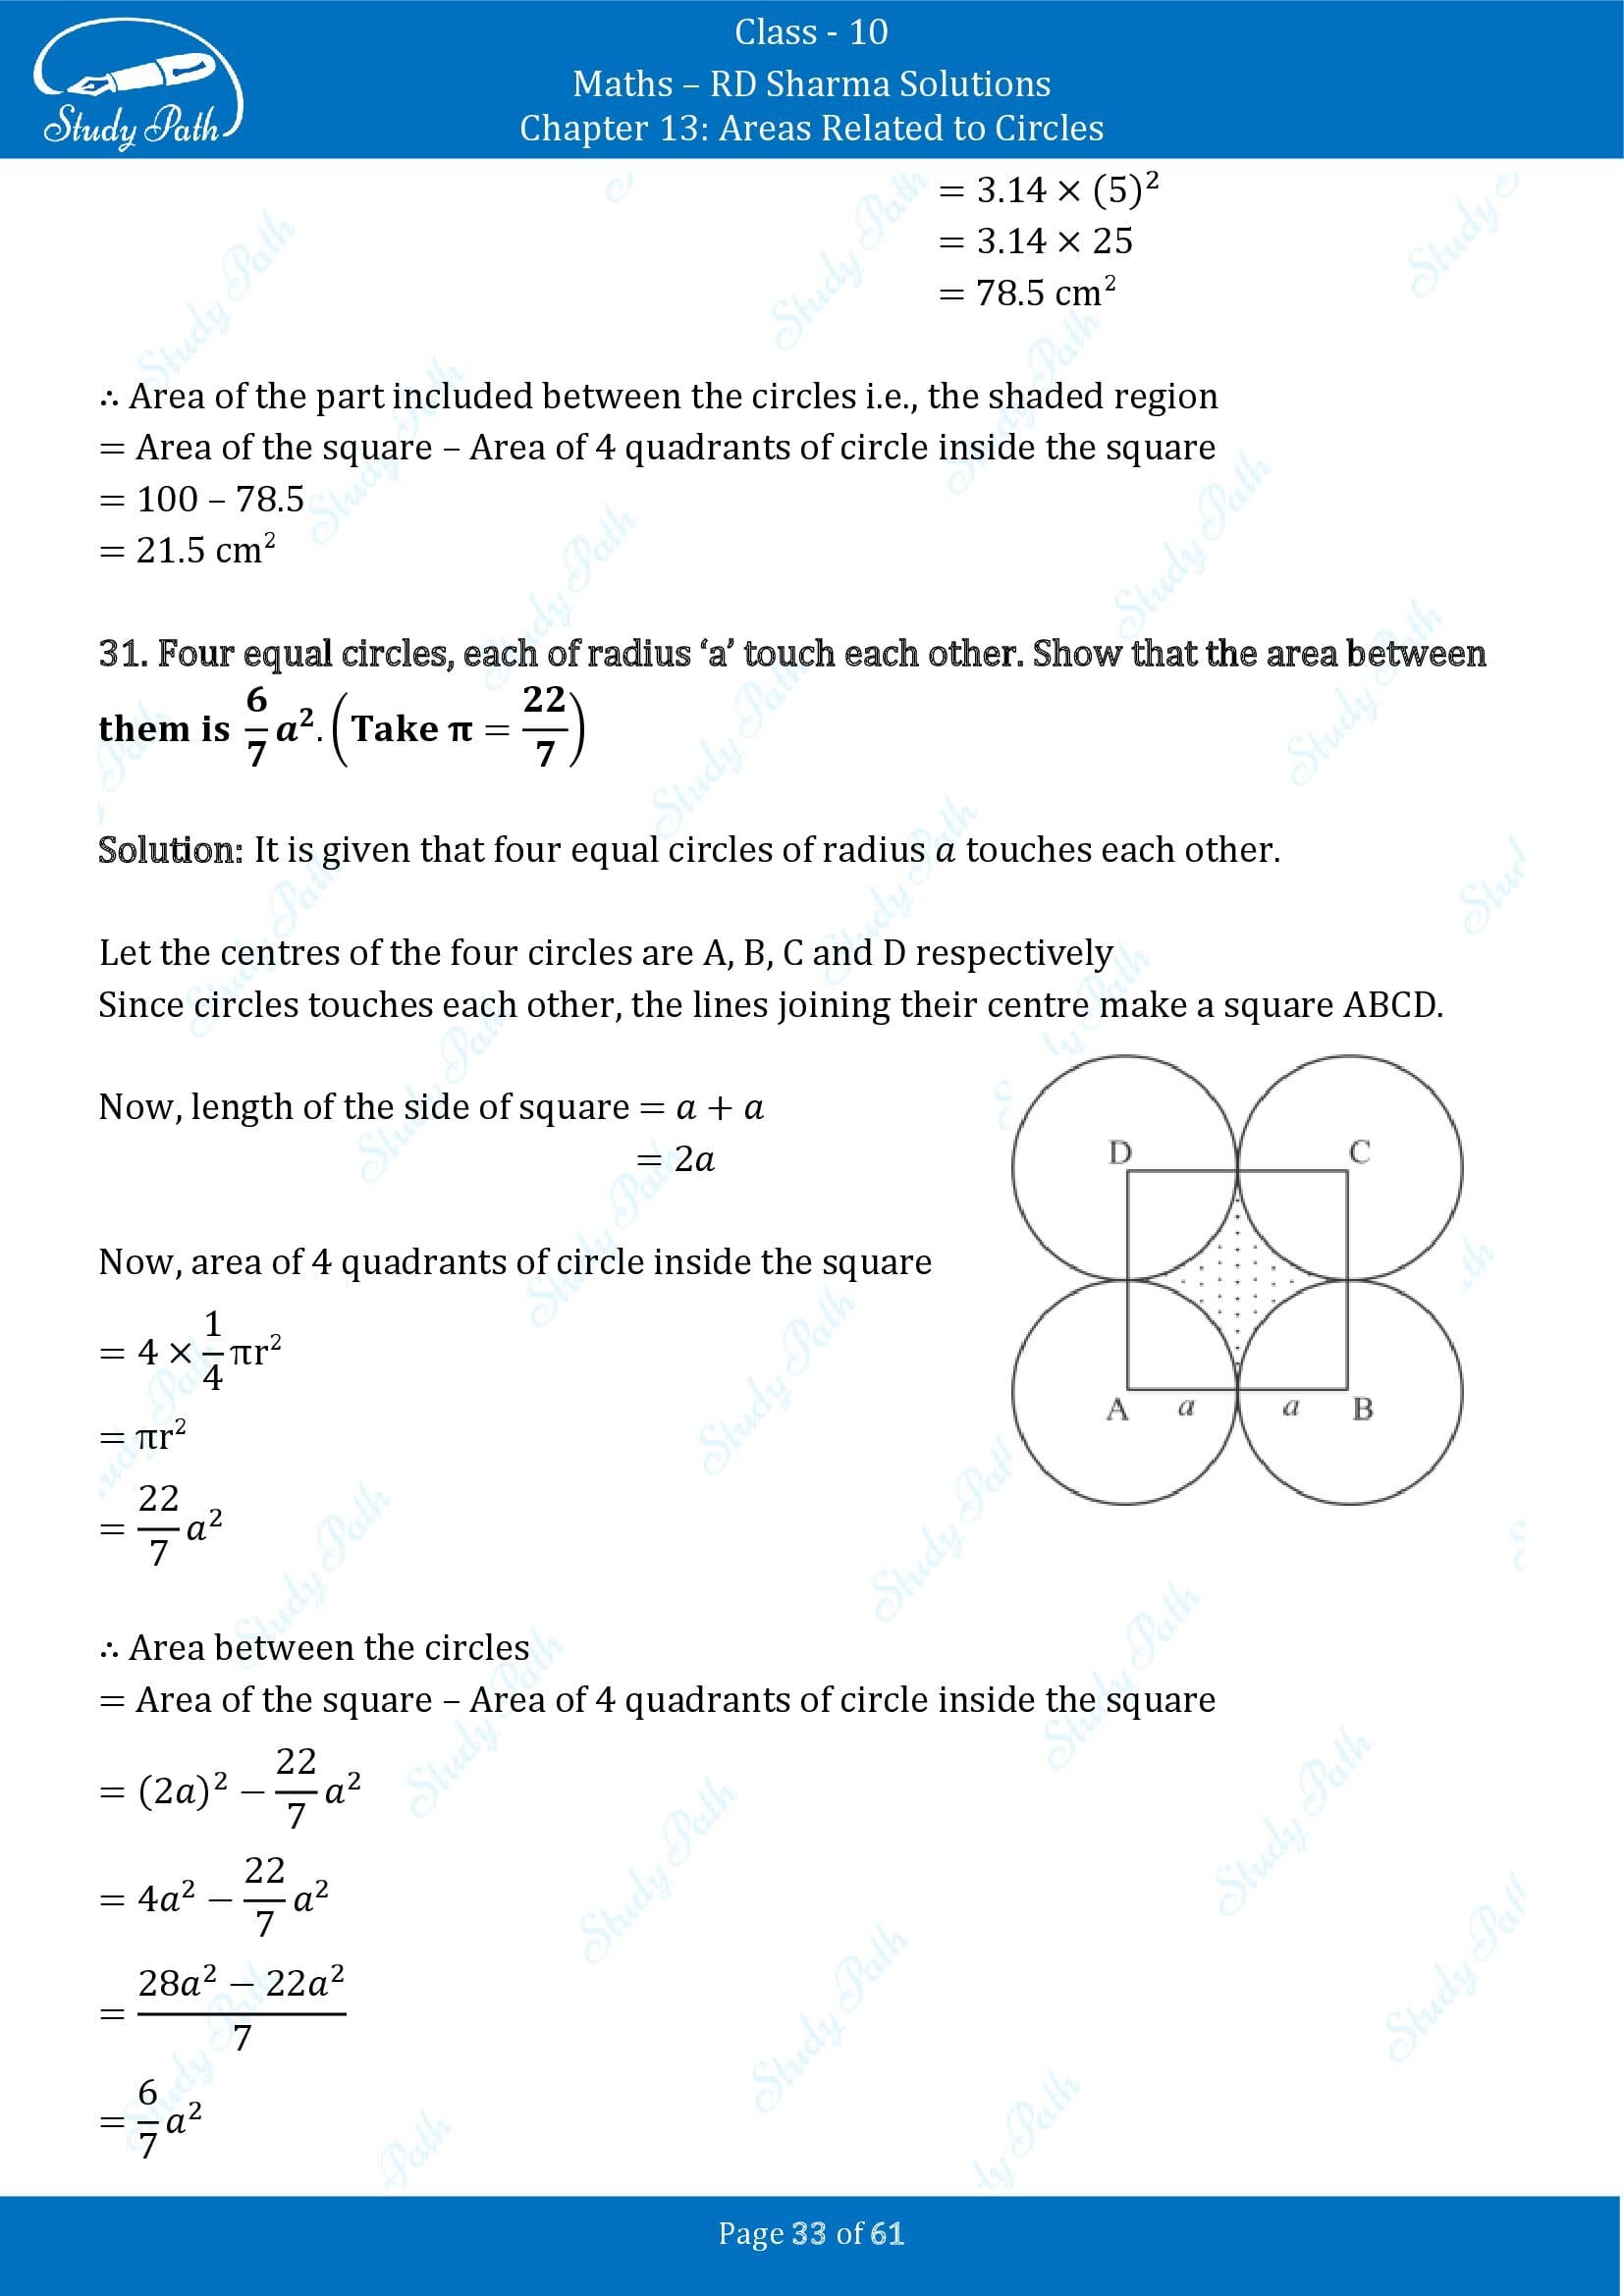 RD Sharma Solutions Class 10 Chapter 13 Areas Related to Circles Exercise 13.4 00033